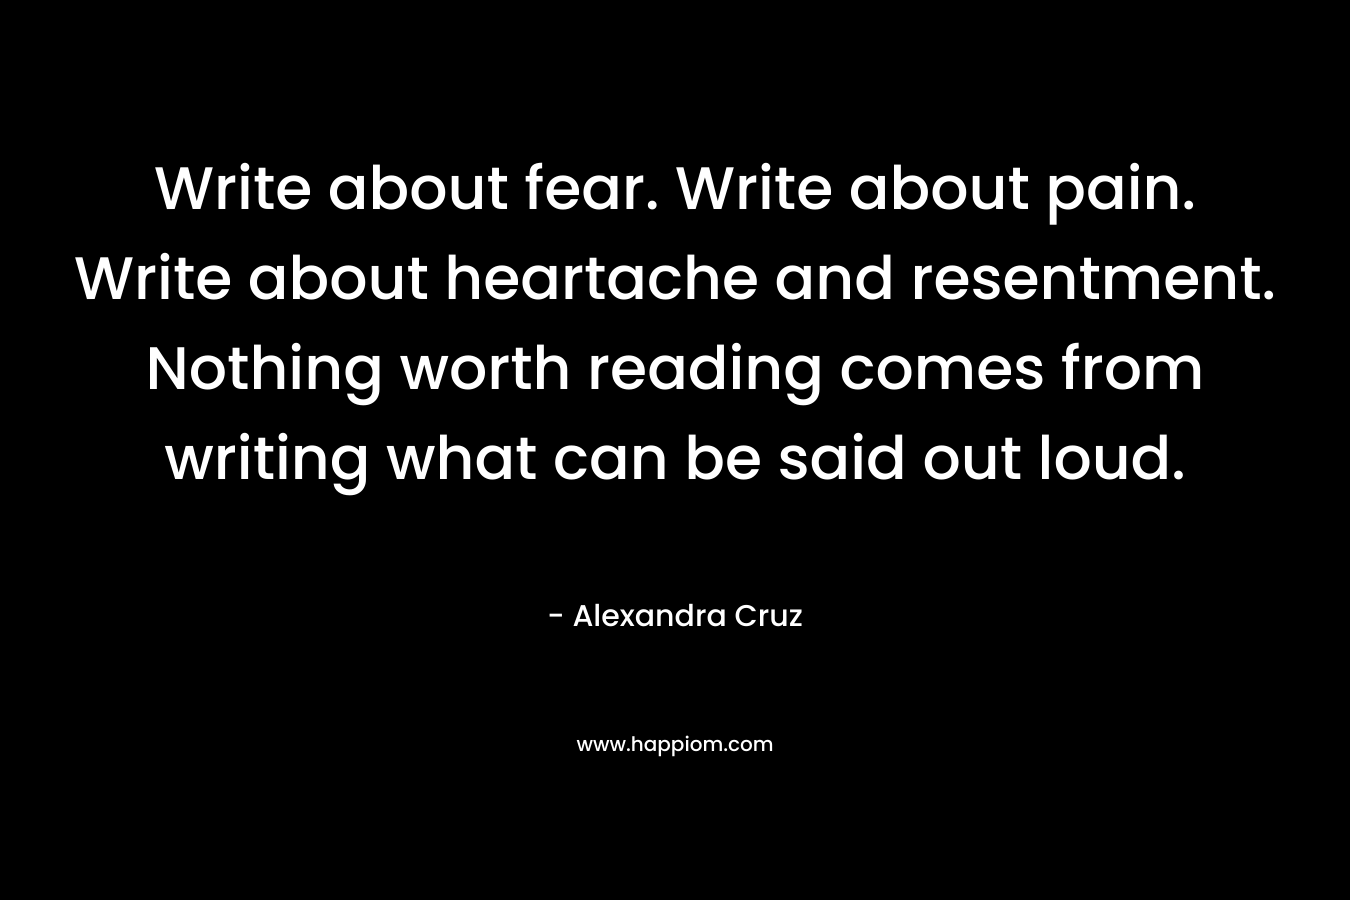 Write about fear. Write about pain. Write about heartache and resentment. Nothing worth reading comes from writing what can be said out loud. – Alexandra Cruz